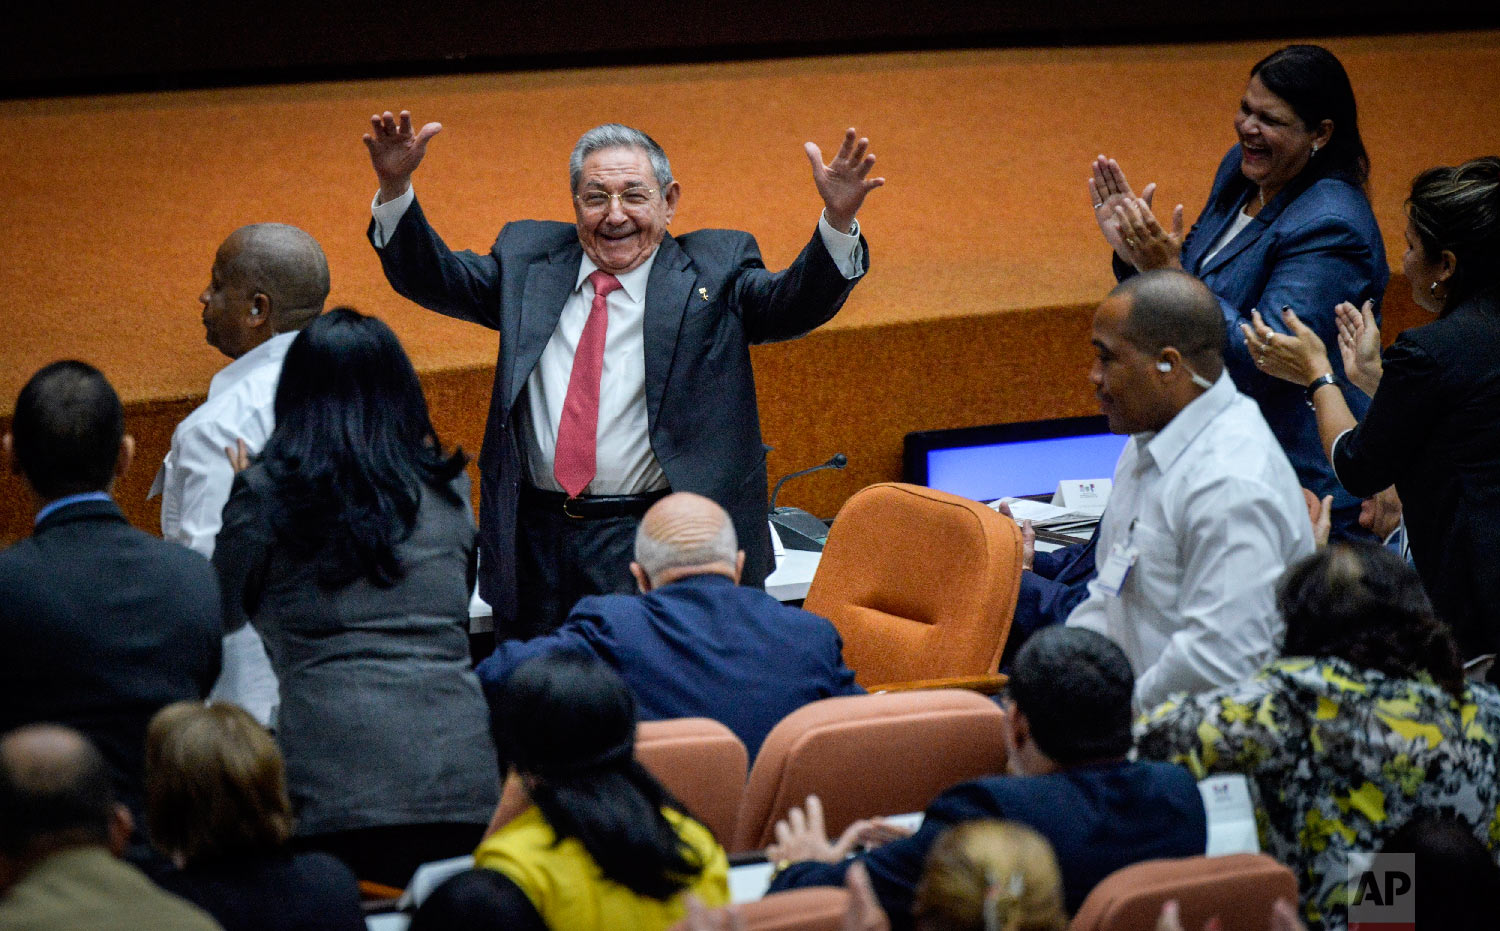  Outgoing President Raul Castro raises his arms in celebration after Miguel Diaz-Canel was elected as the island nation's new president, at the National Assembly in Havana, Cuba on April 19, 2018. Castro passed Cuba's presidency to Diaz-Canel, puttin